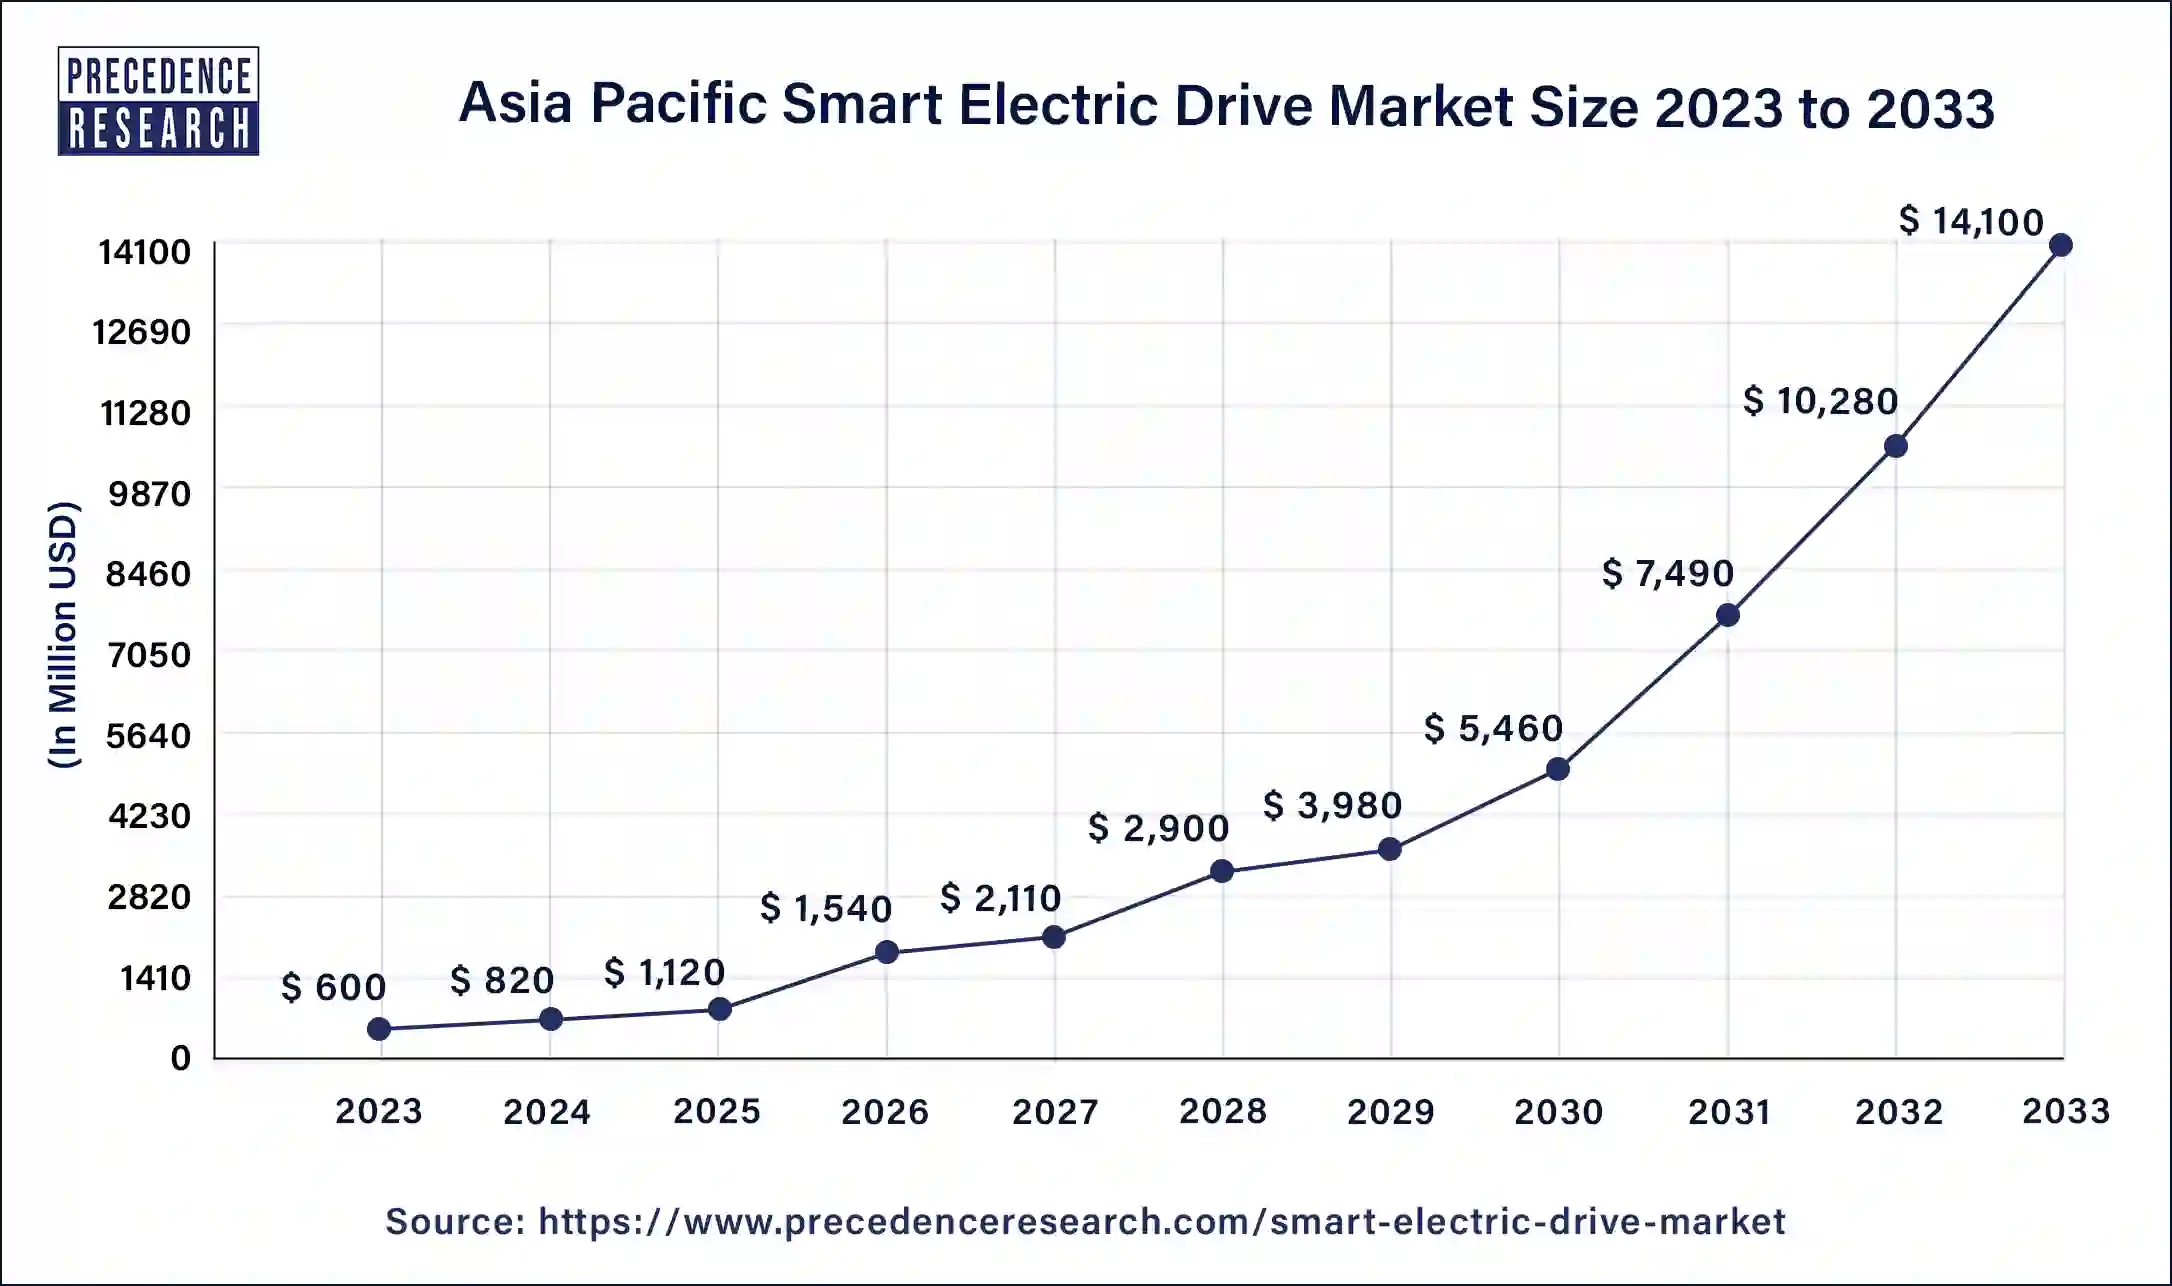 Asia Pacific Smart Electric Drive Market Size 2024 to 2033